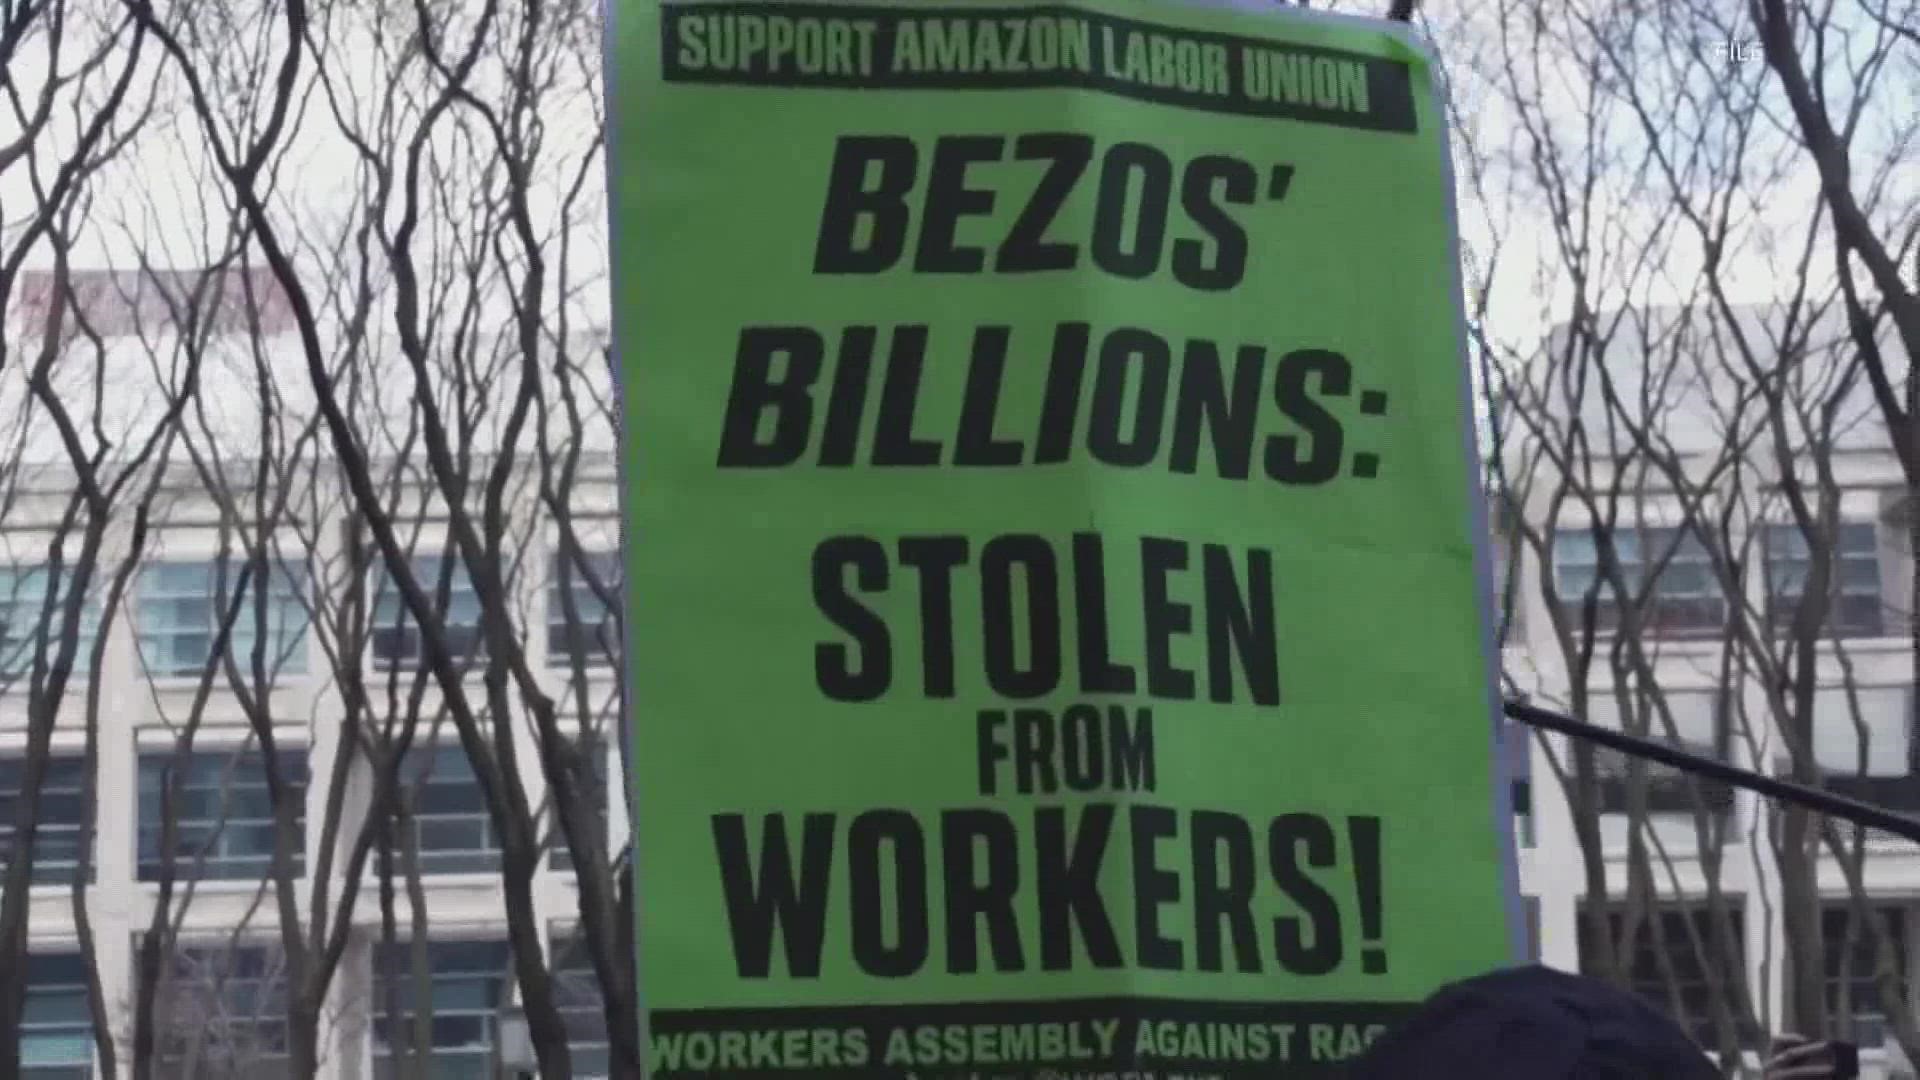 This wouldn't be the first union that Amazon has seen, but it would be the first local chapter outside New York.